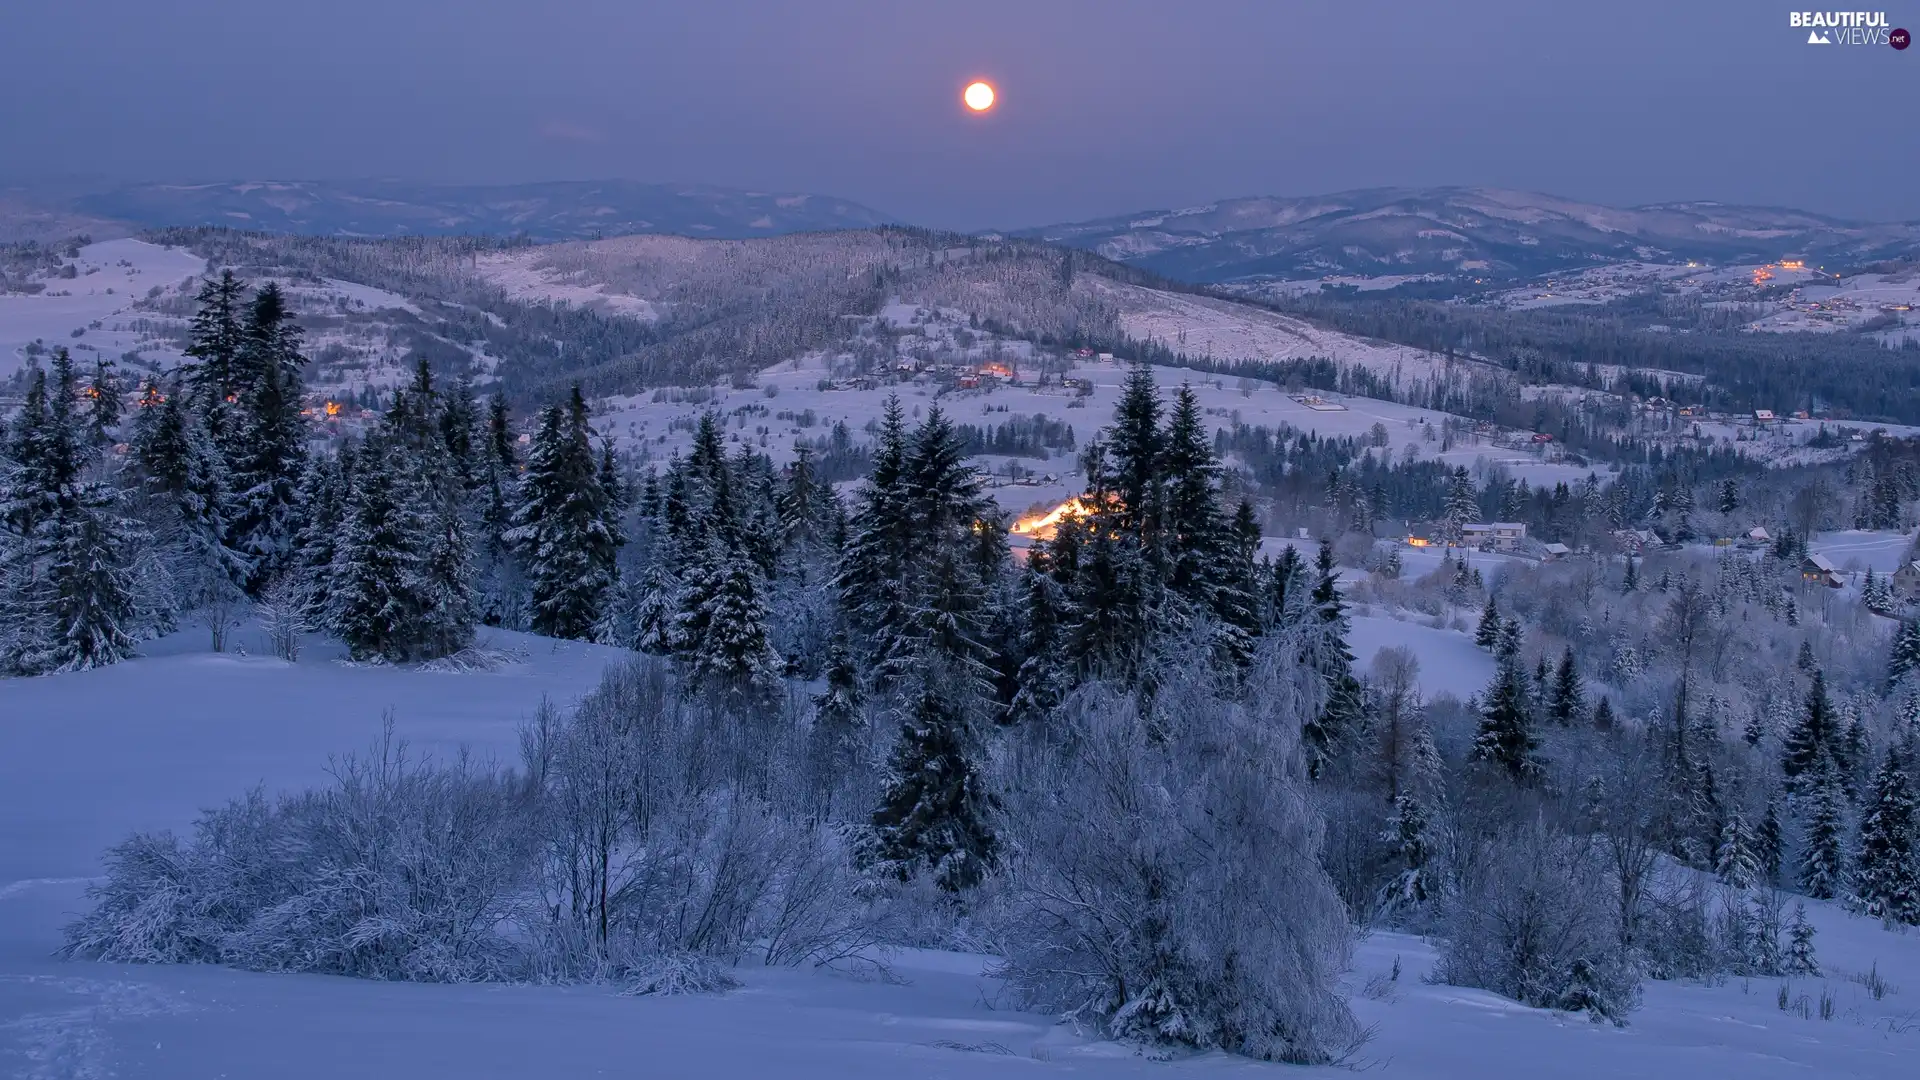 Mountains, trees, snow, viewes, Houses, moon, winter, Spruces